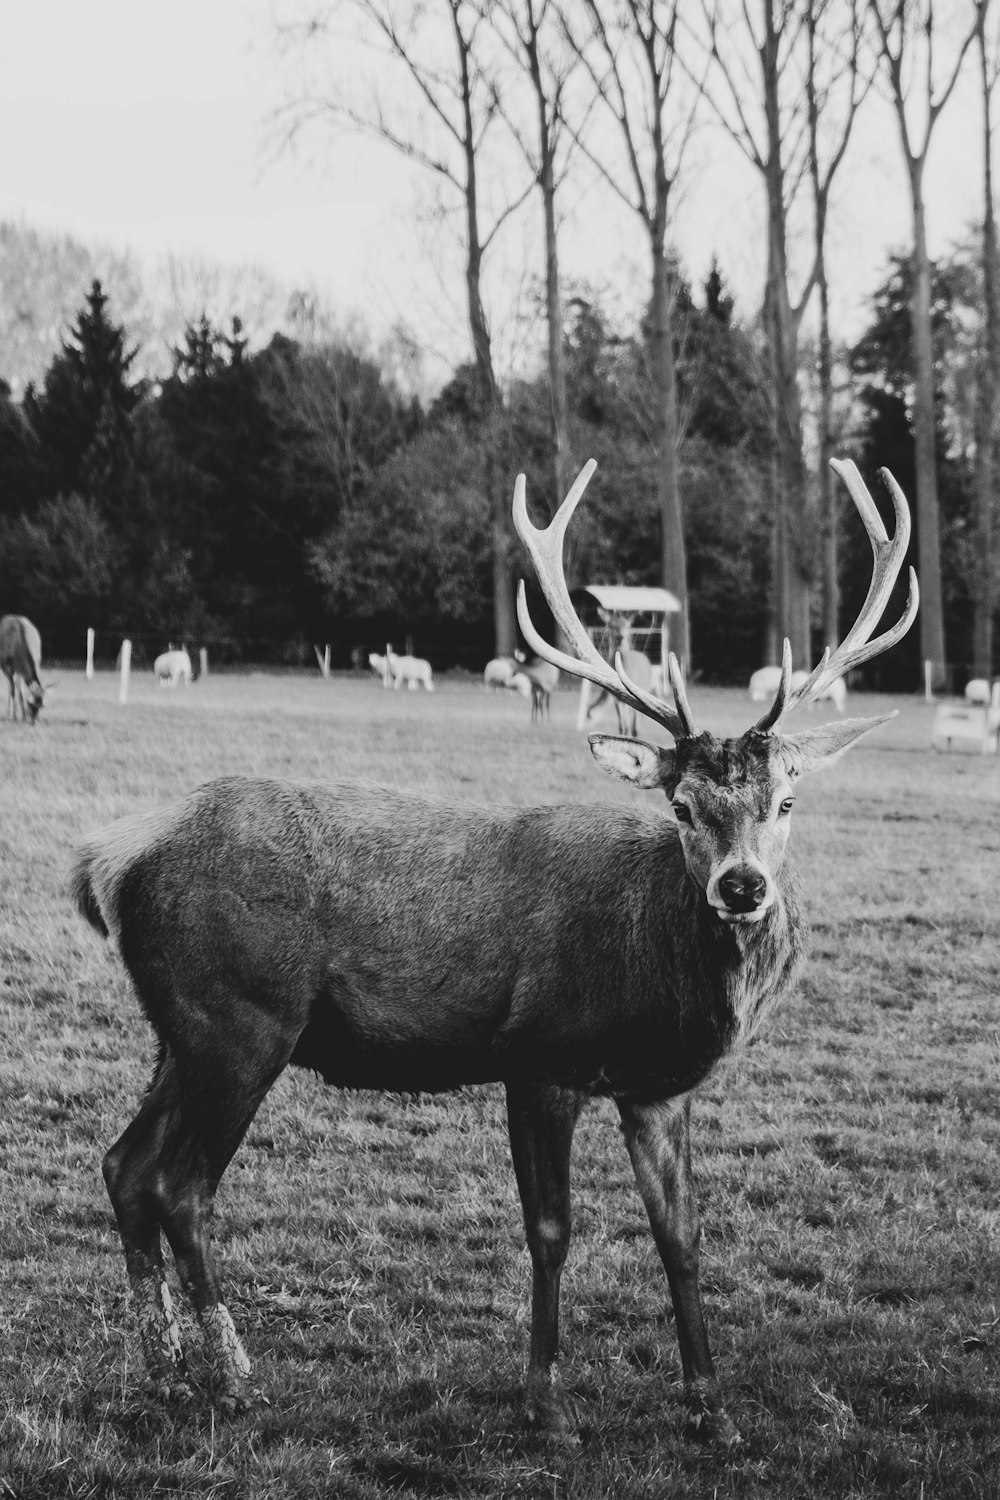 grayscale photo of deer on grass field